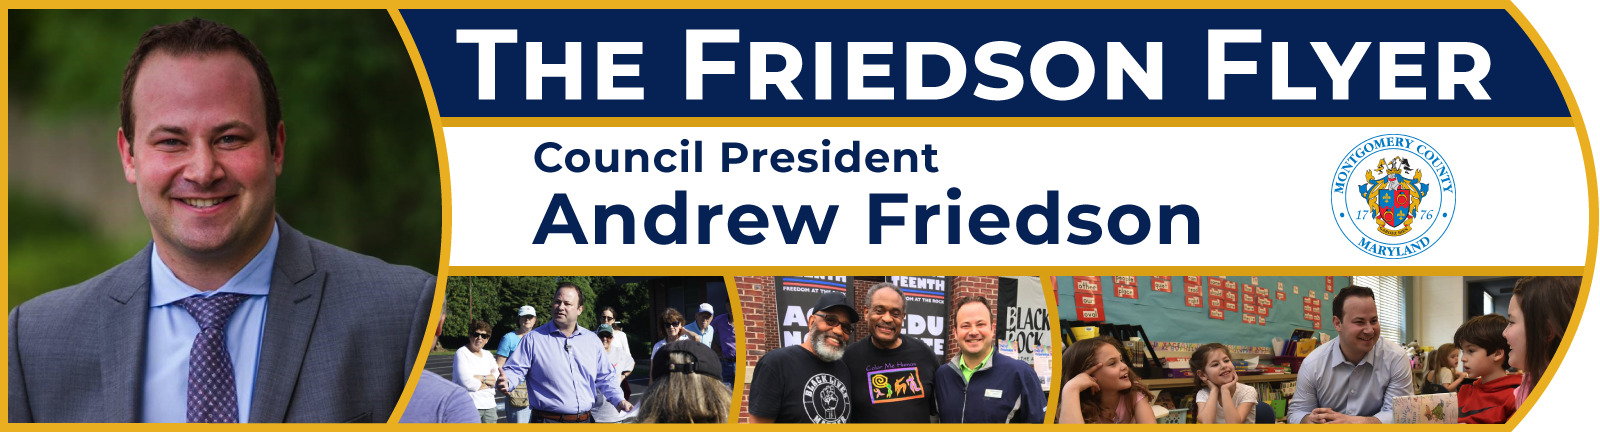 The Friedson Flyer - Council President Friedson’s newsletter banner image